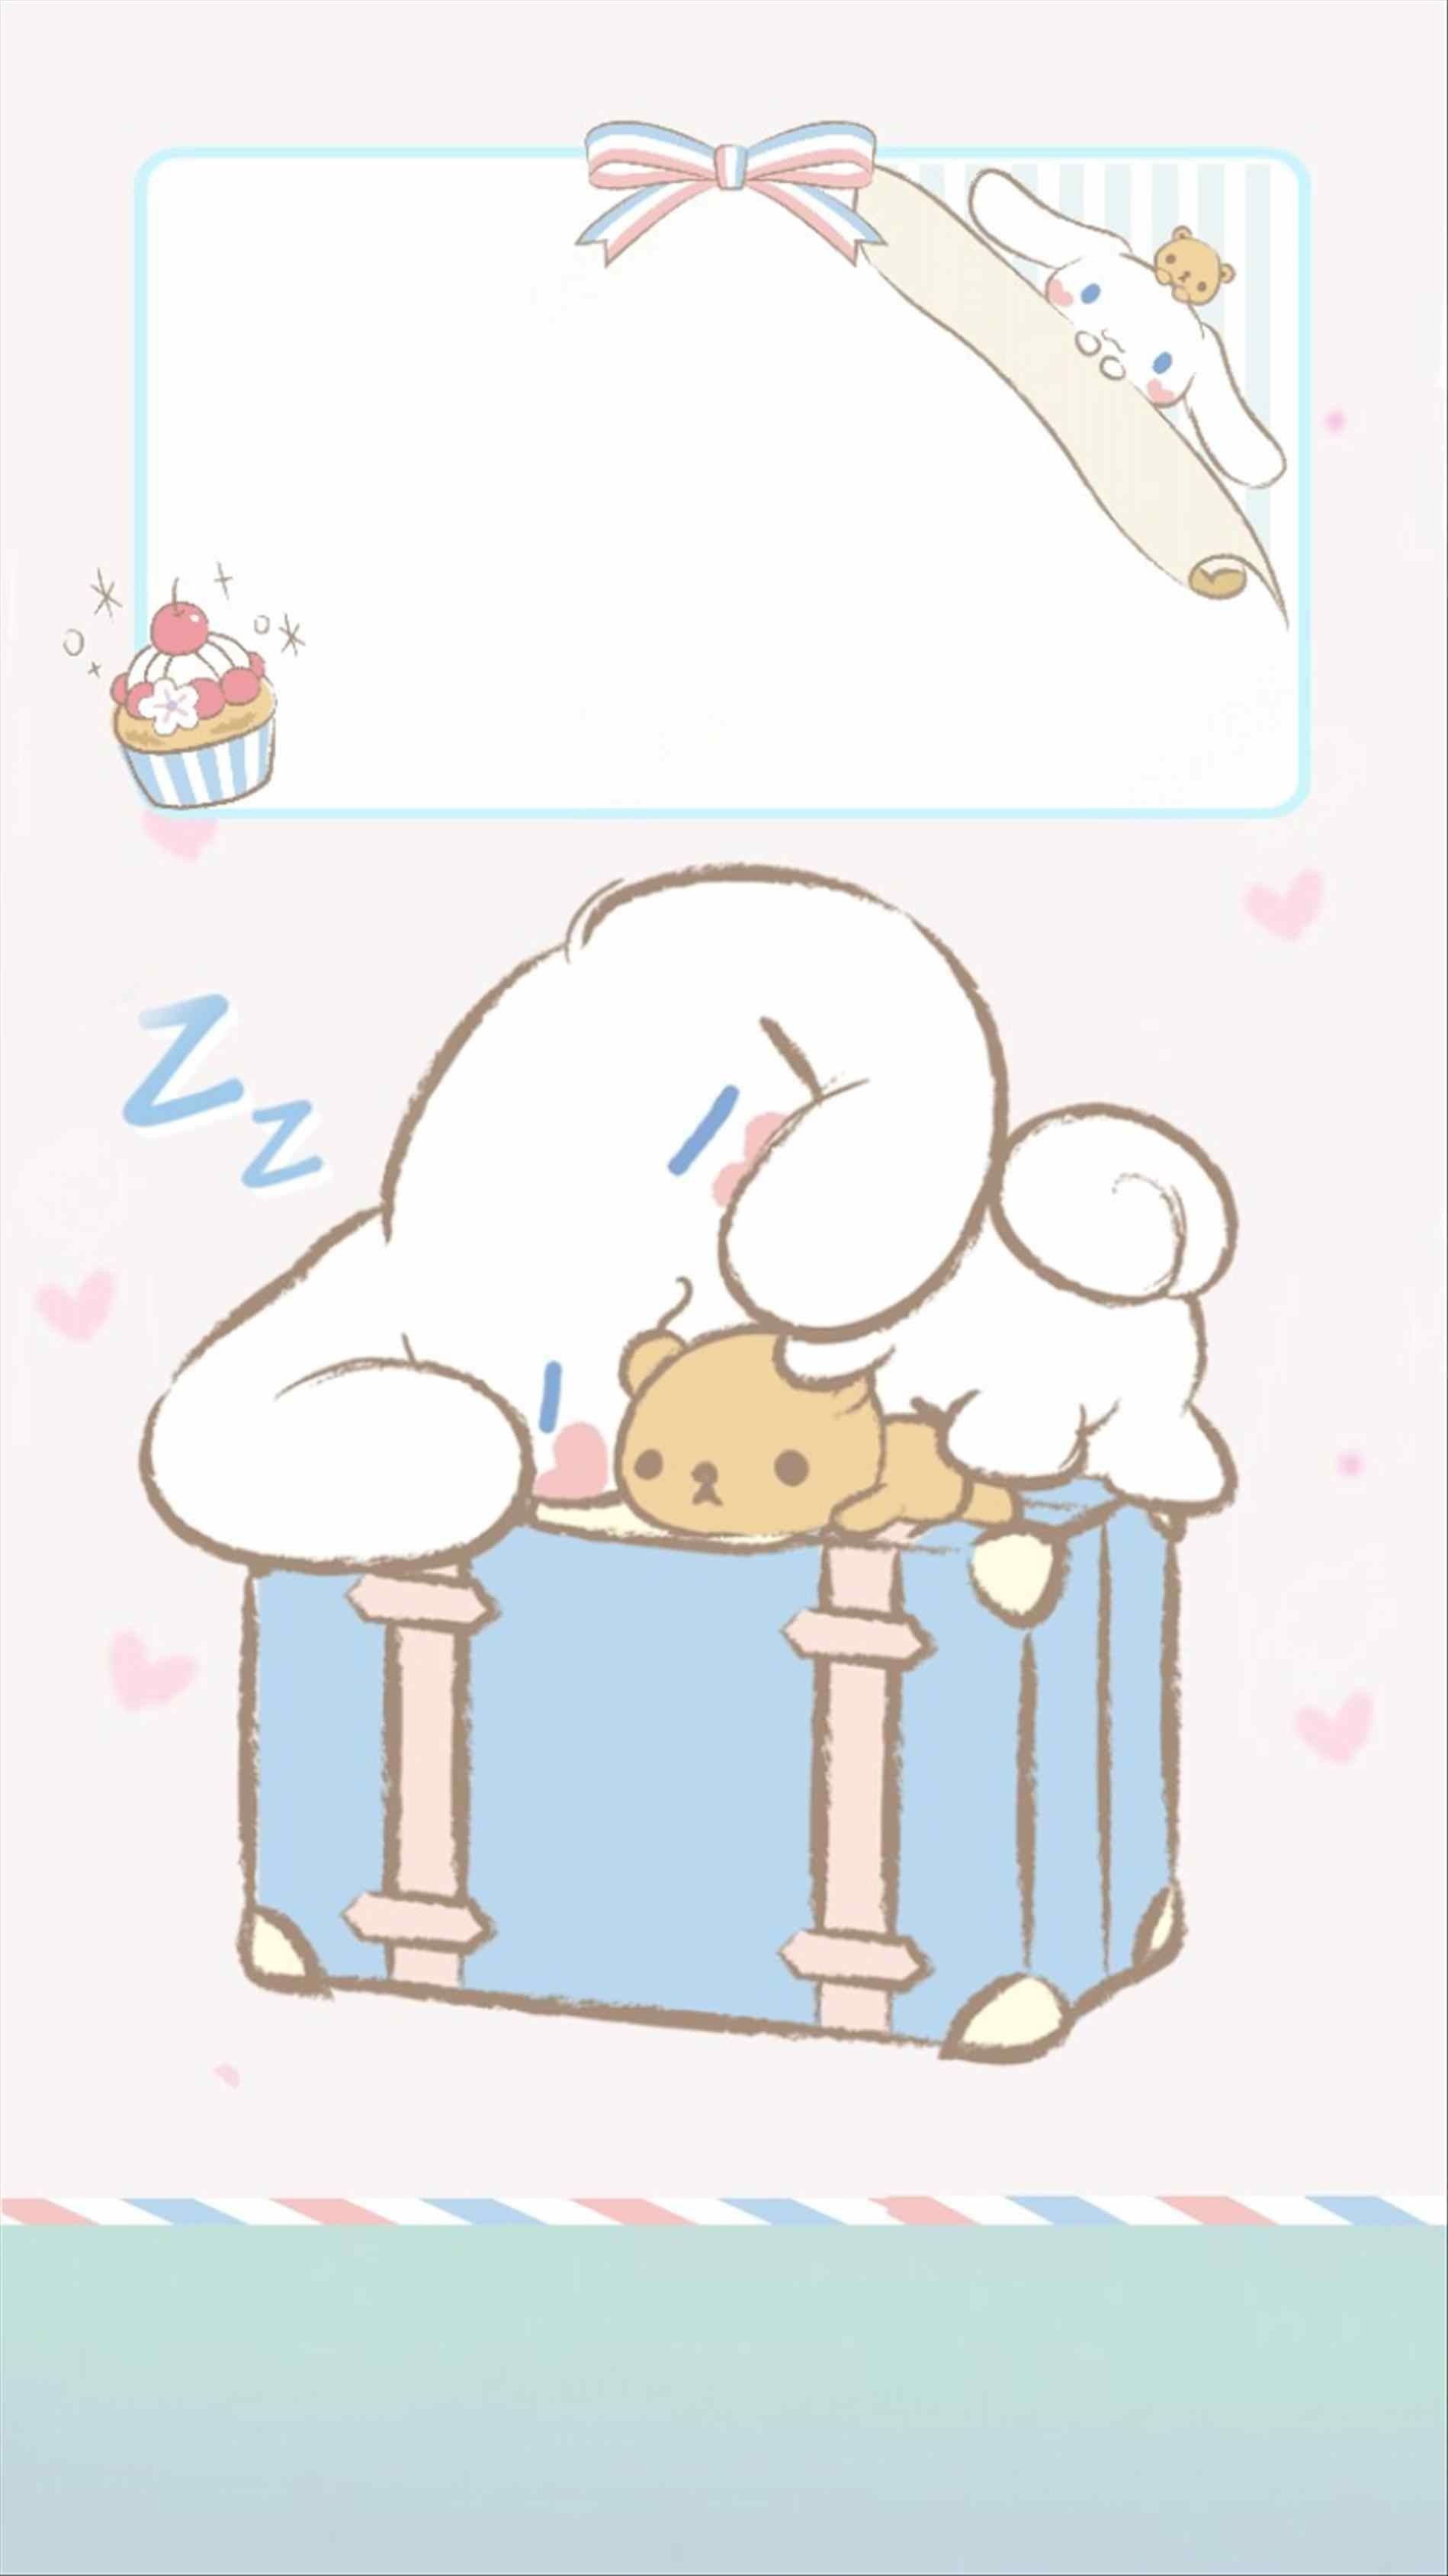 Sanrio Characters  Wallpaper on the App Store